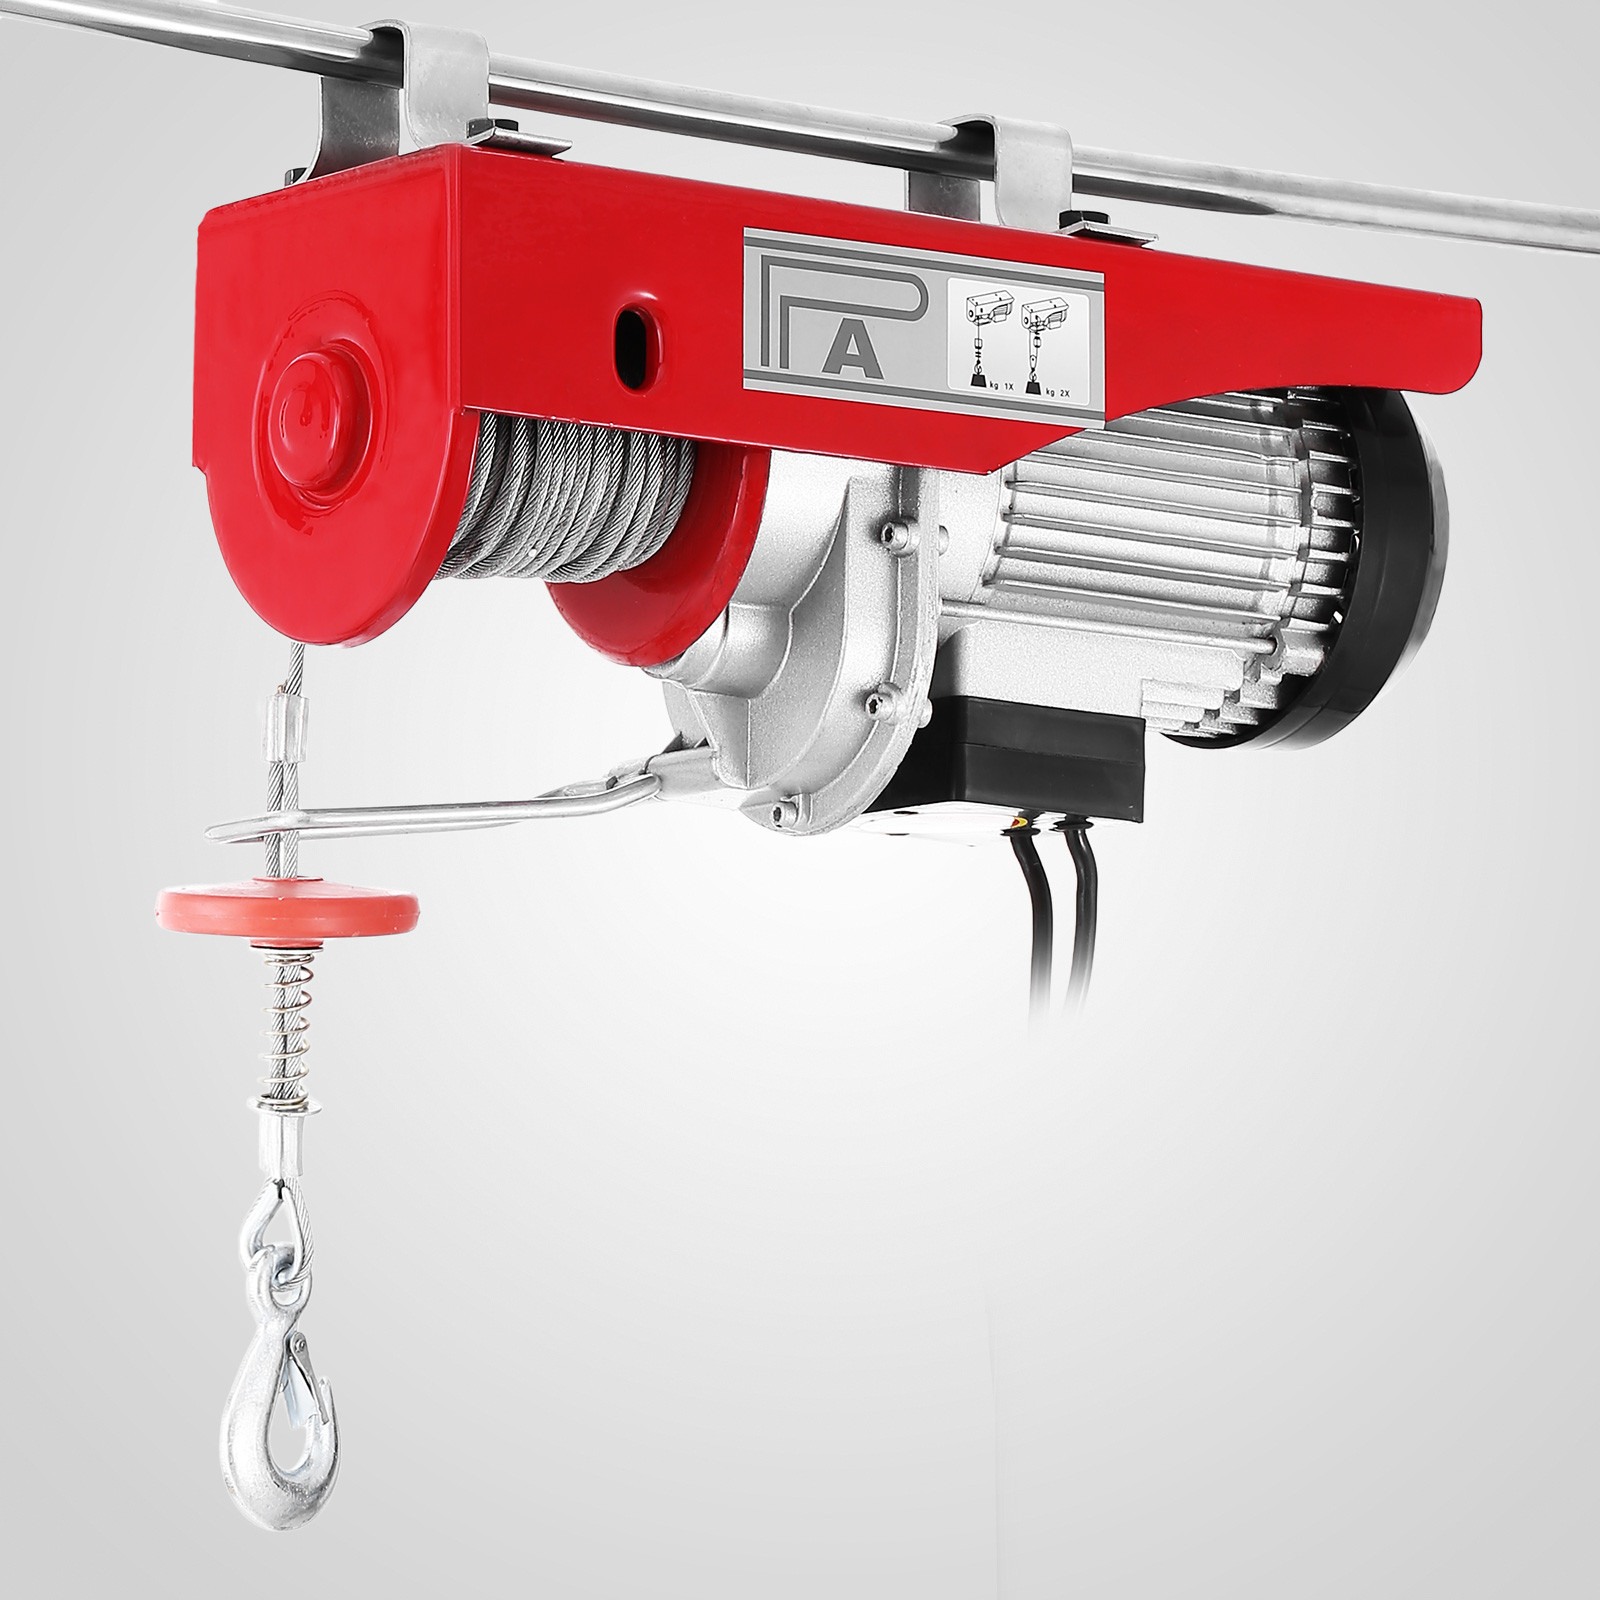 hoist cable crossover machine